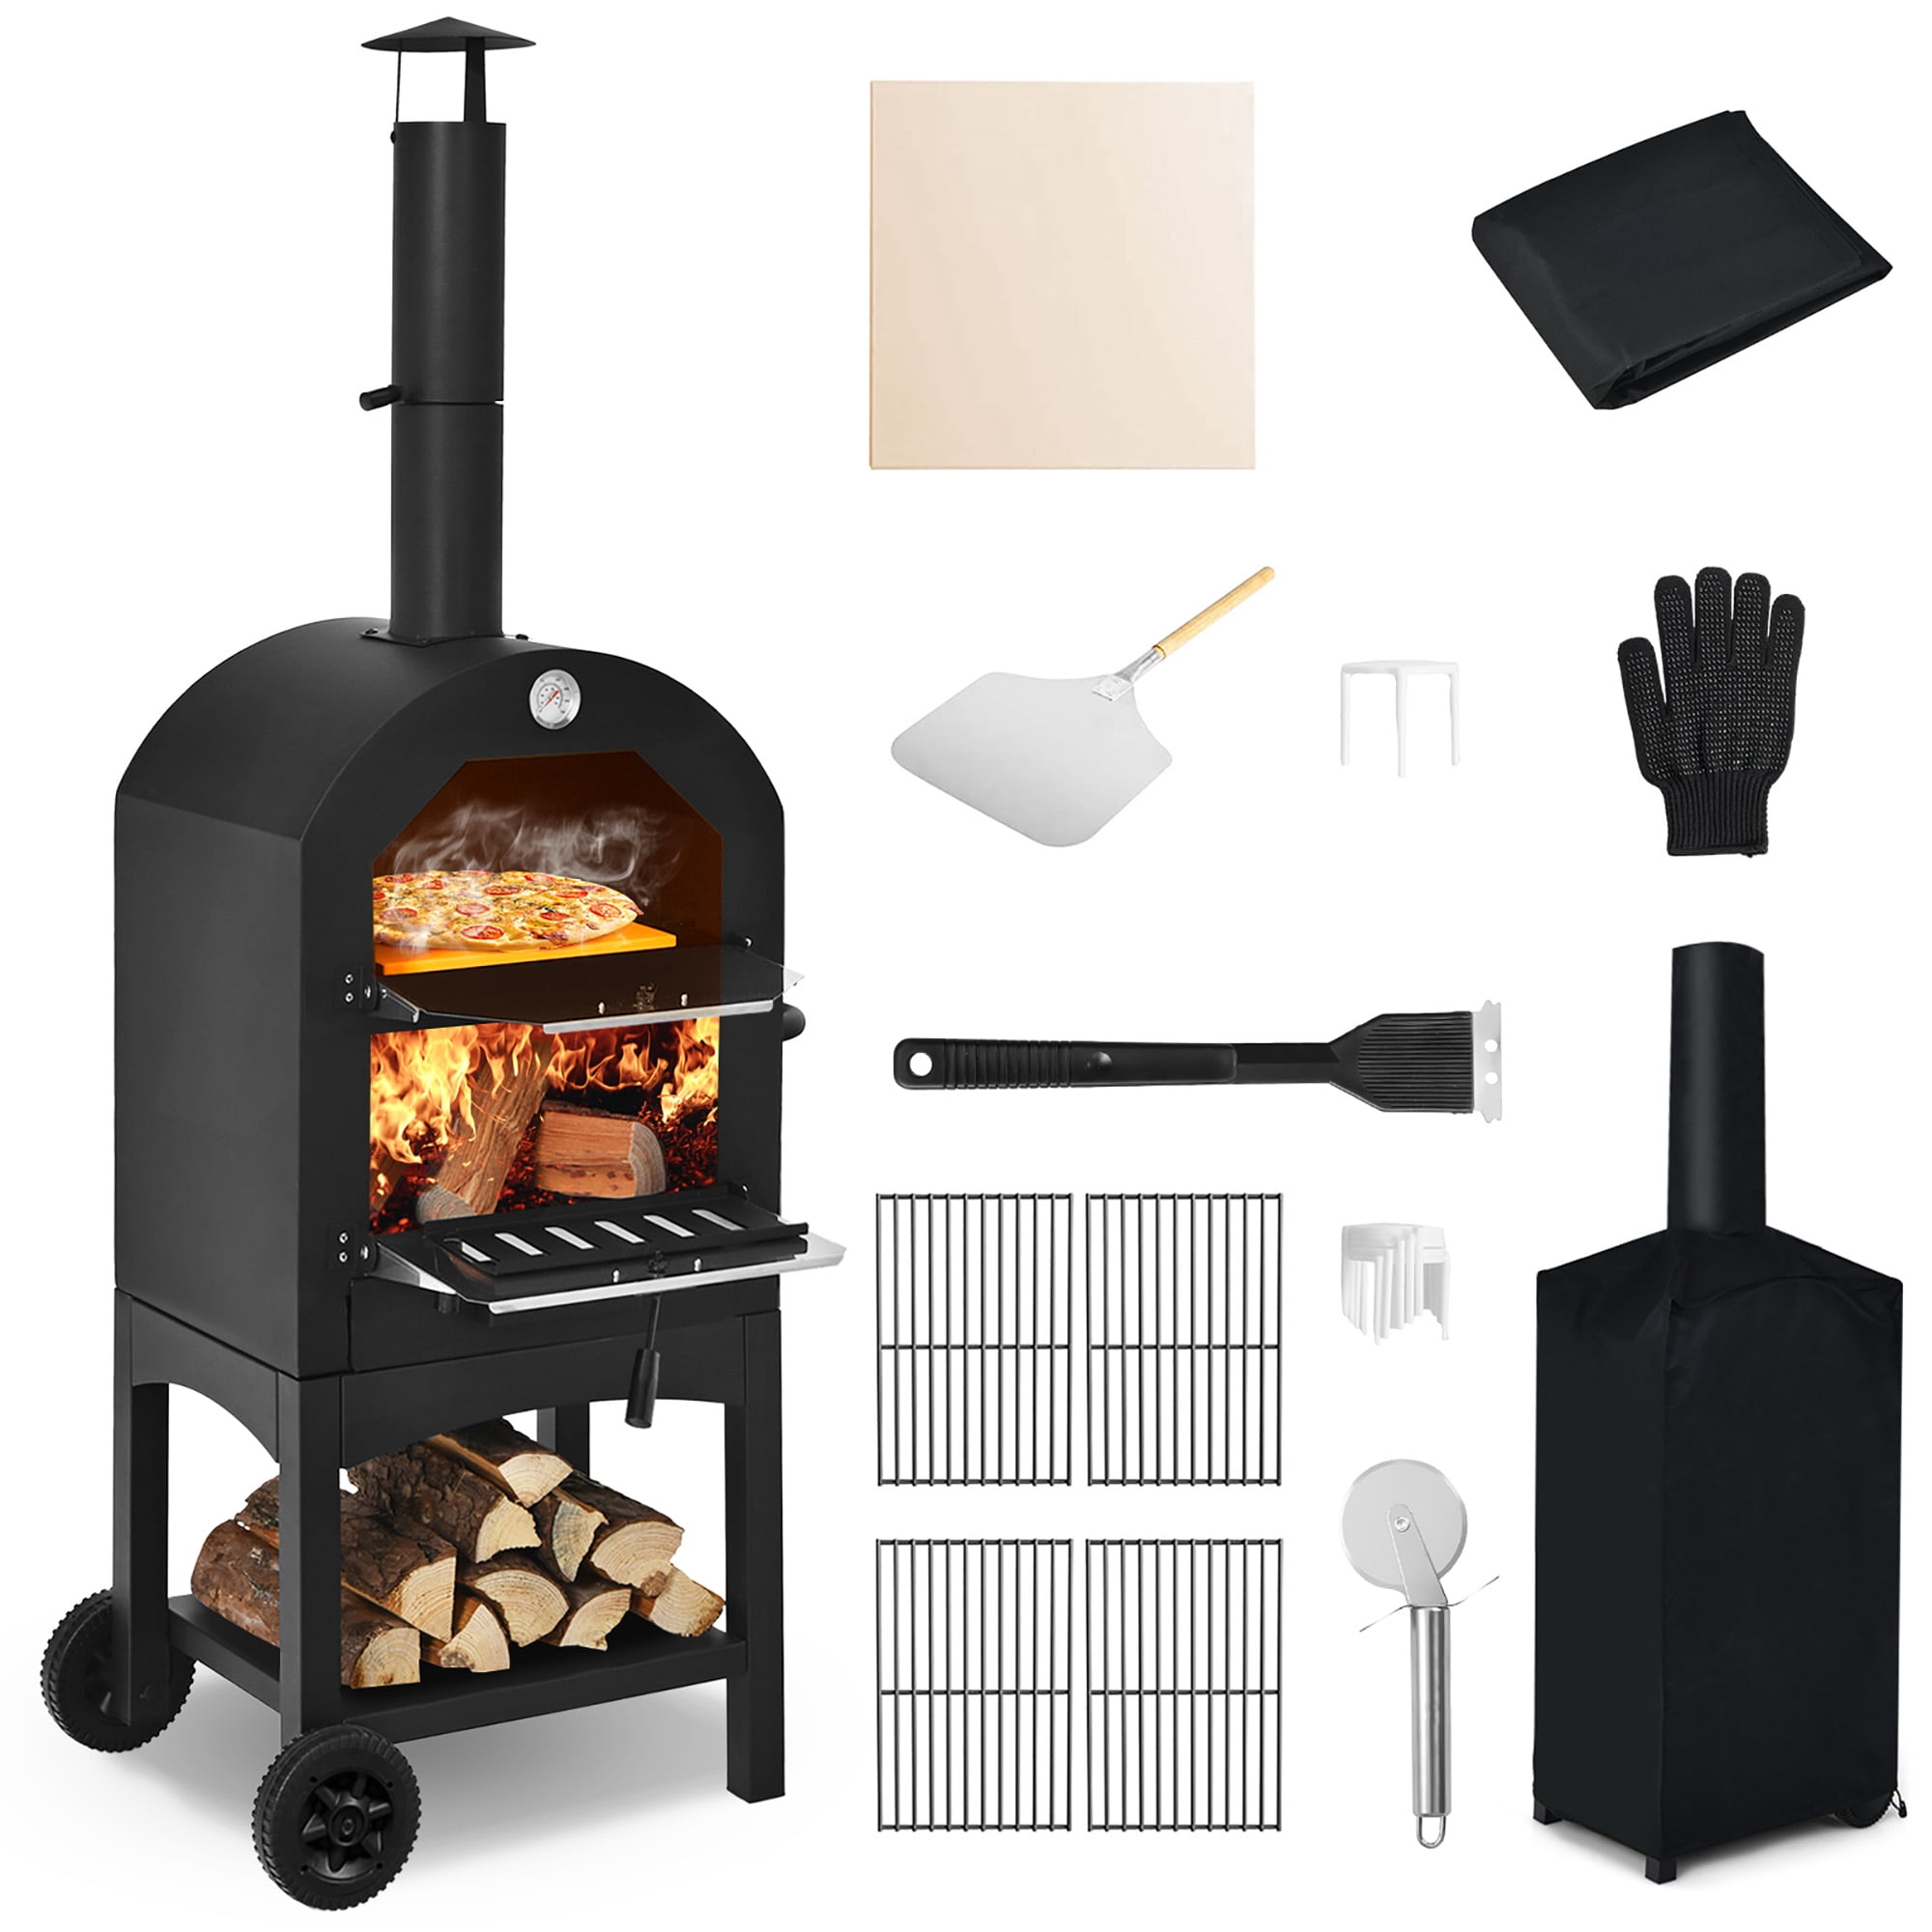 Costway Outdoor Pizza Oven Wood Fire Pizza Maker Grill with Pizza Stone & Waterproof Cover